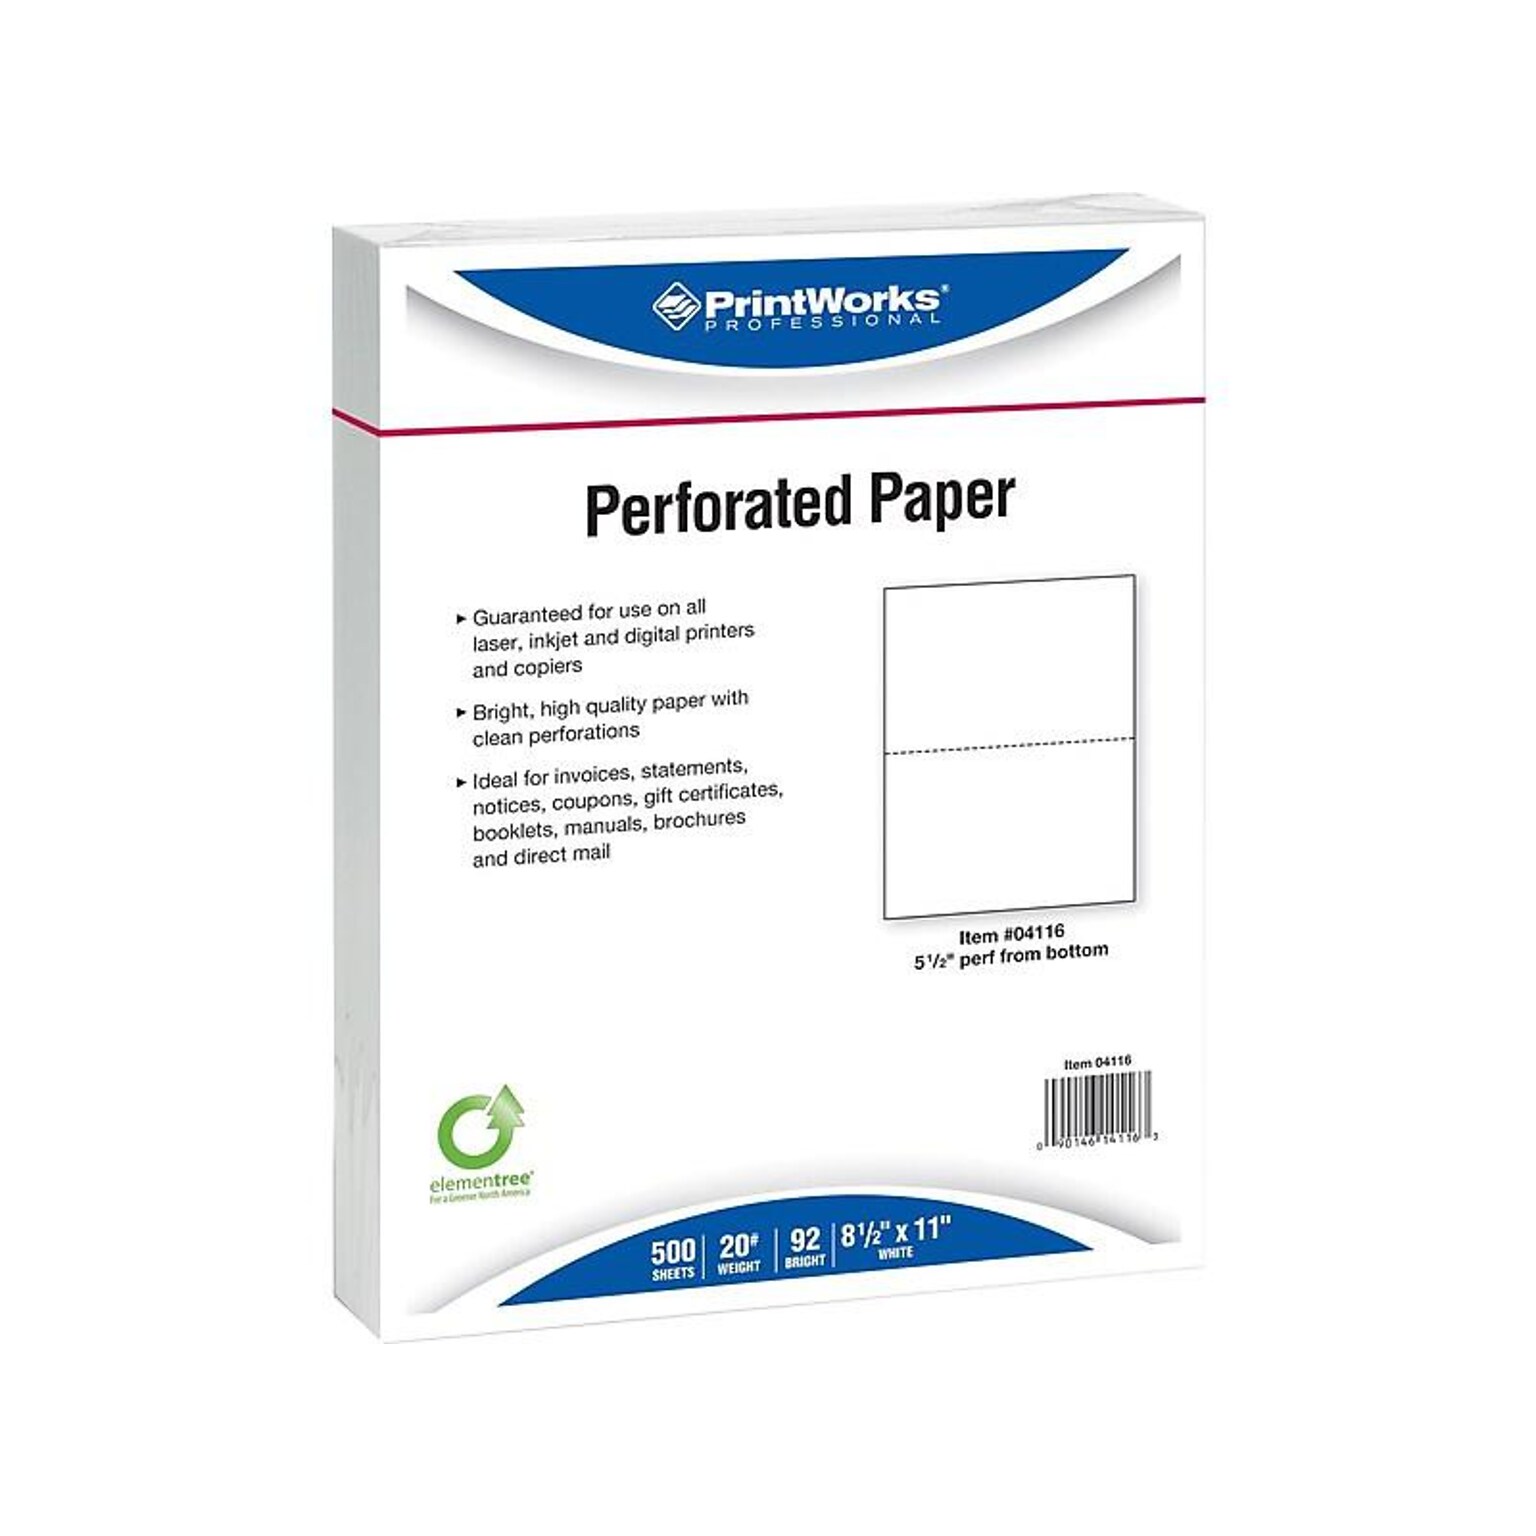 Printworks® Professional 8.5 x 11 Perforated Paper, 20 lbs., 92 Brightness, 2500 Sheets/Carton (04116)